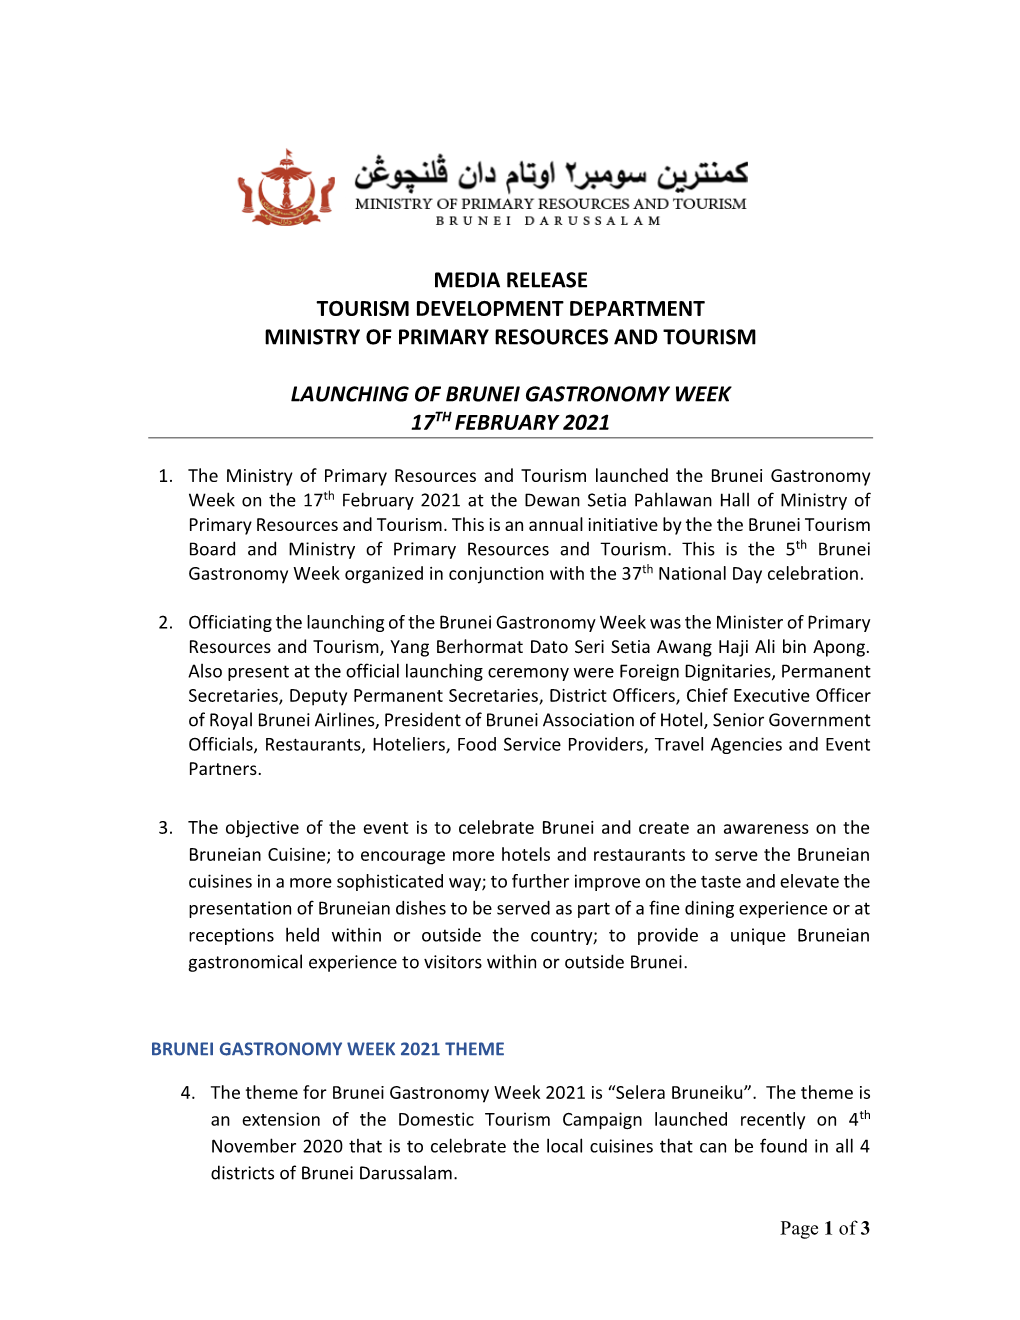 Media Release Tourism Development Department Ministry of Primary Resources and Tourism